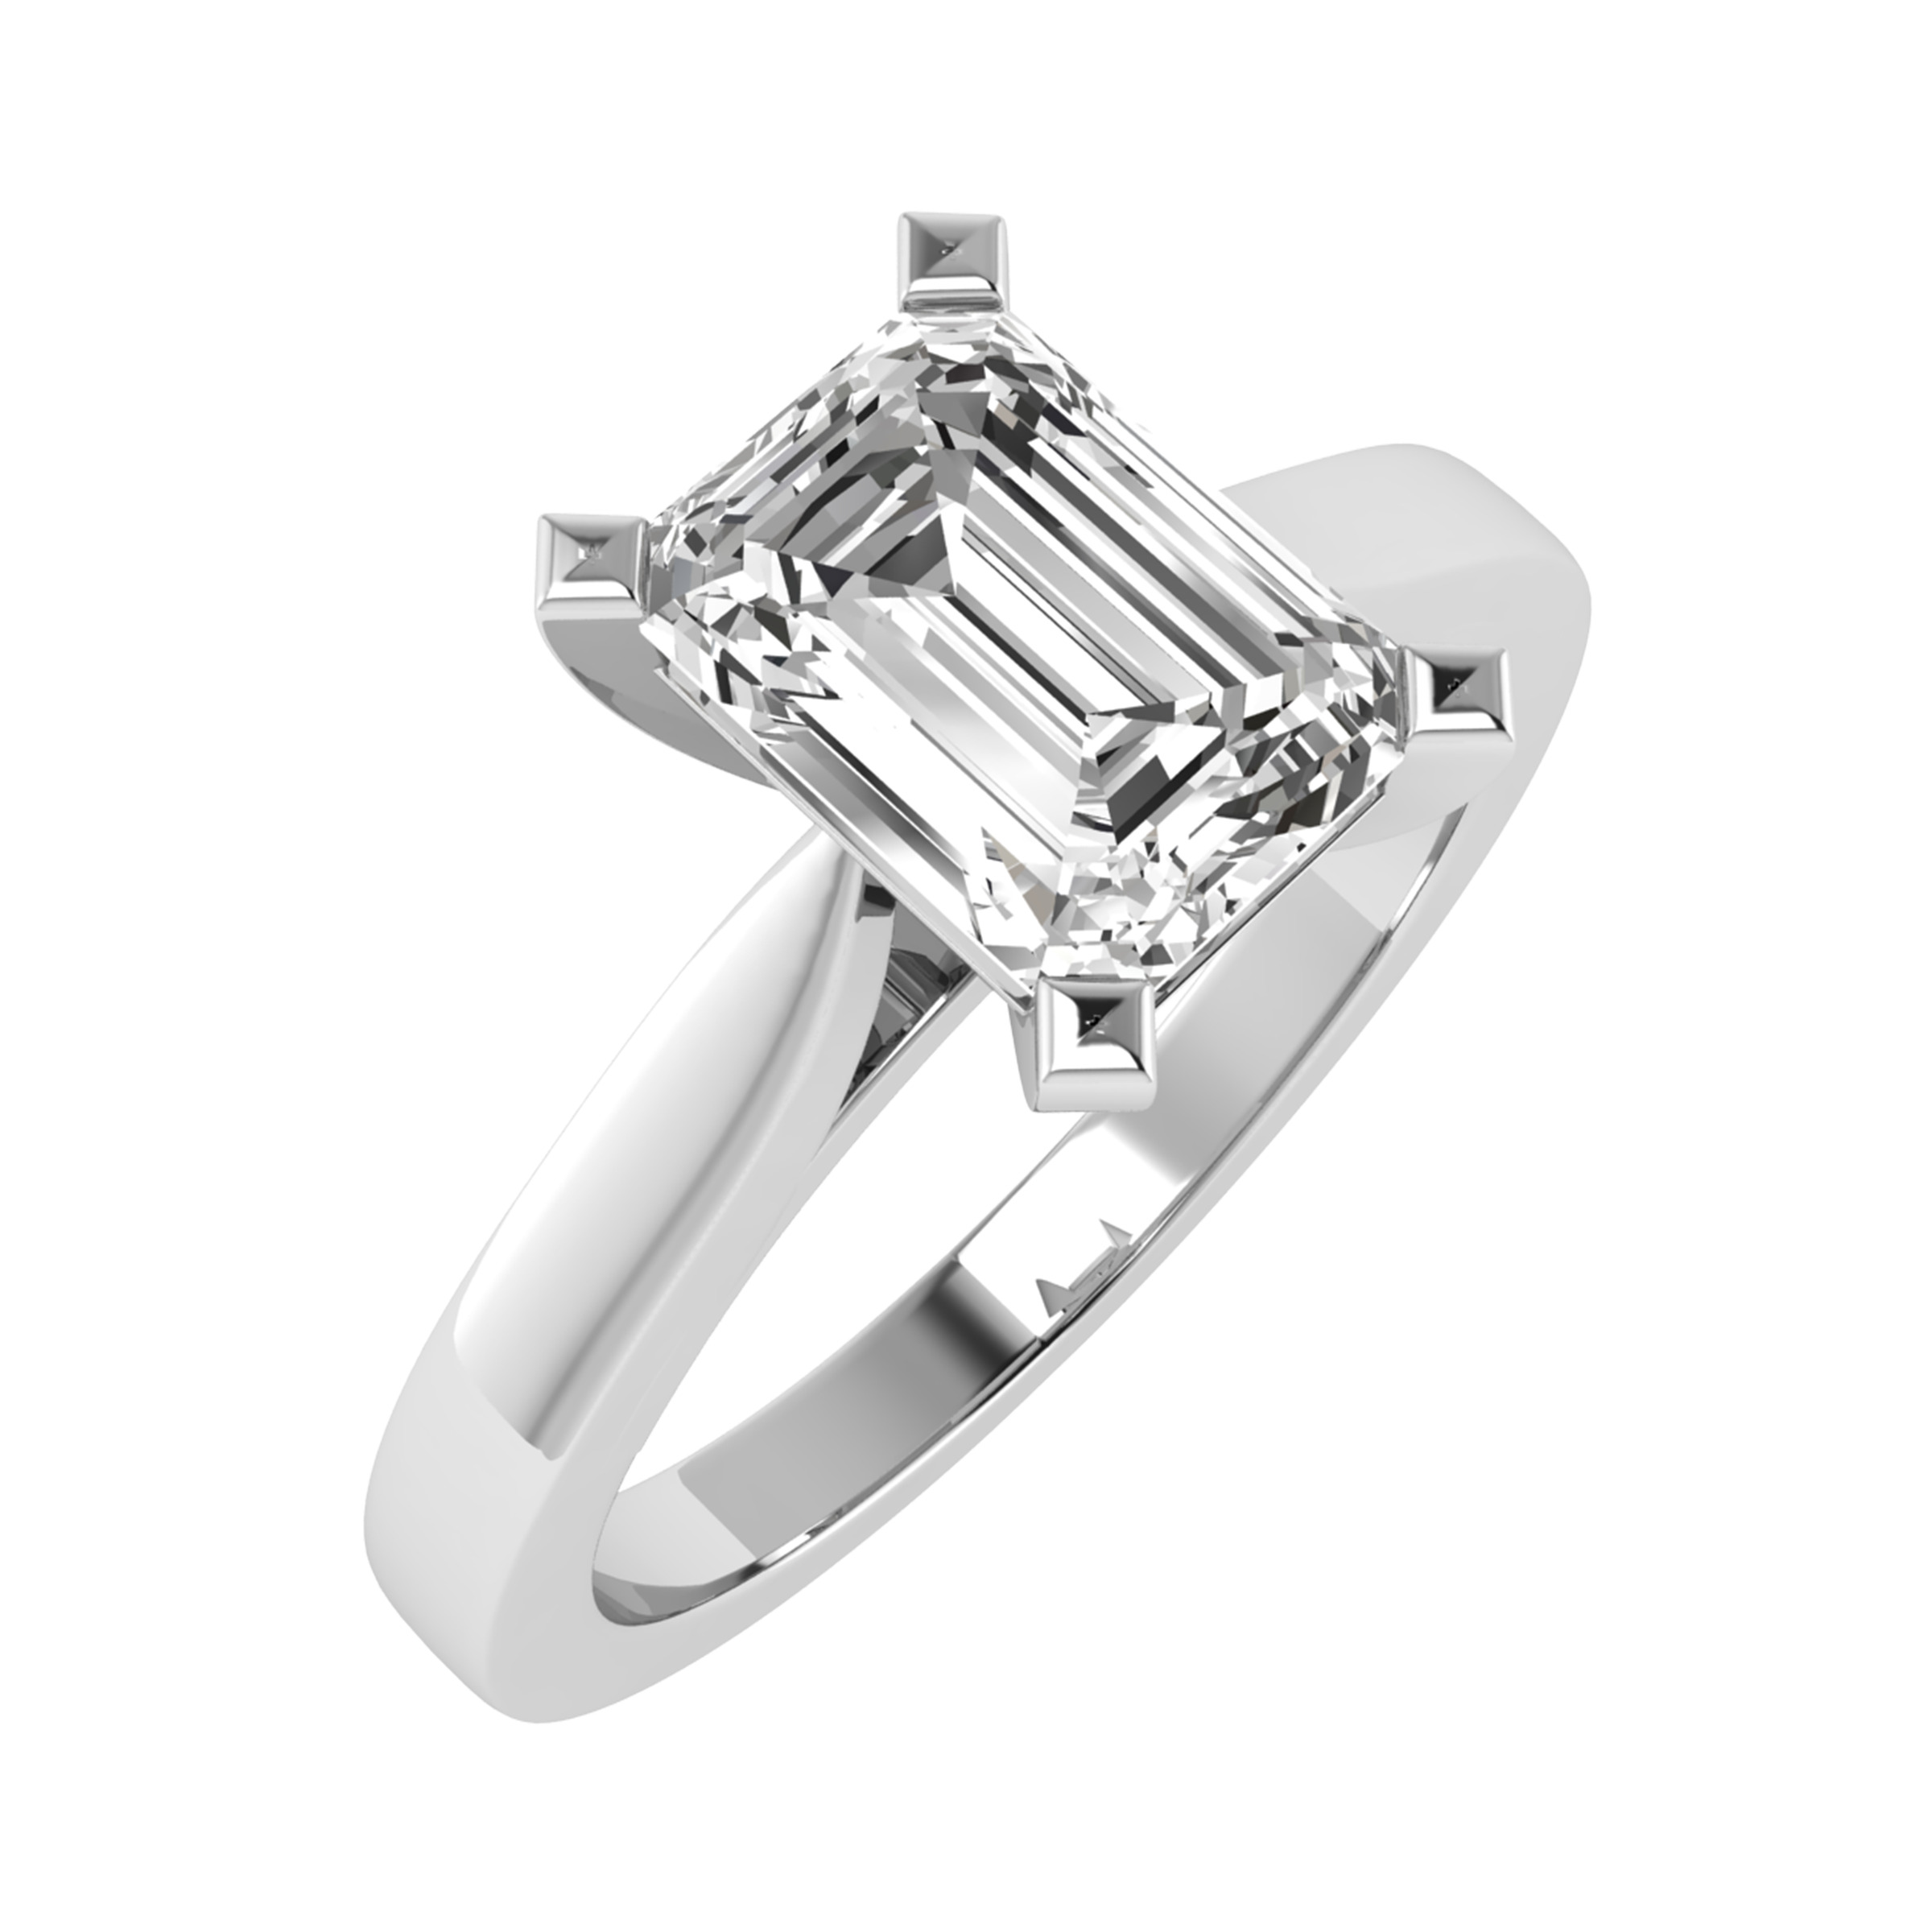 Emerald Cut 4 Claw Solitaire Engagement Ring